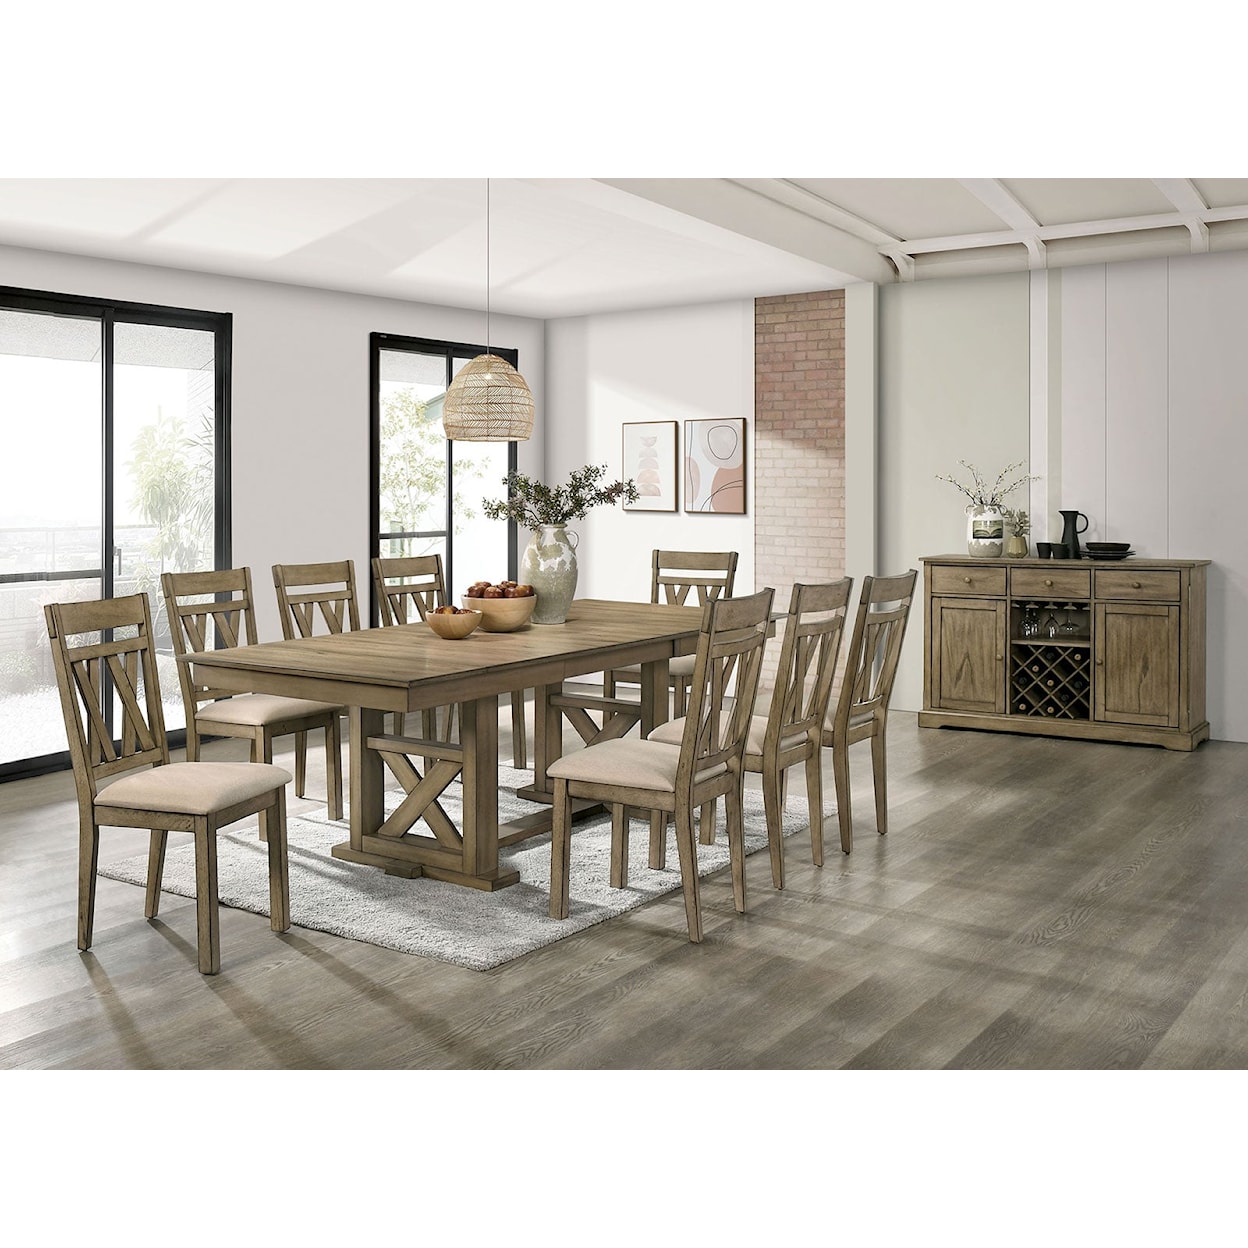 Furniture of America TEMPLEMORE 9-Piece Dining Table Set